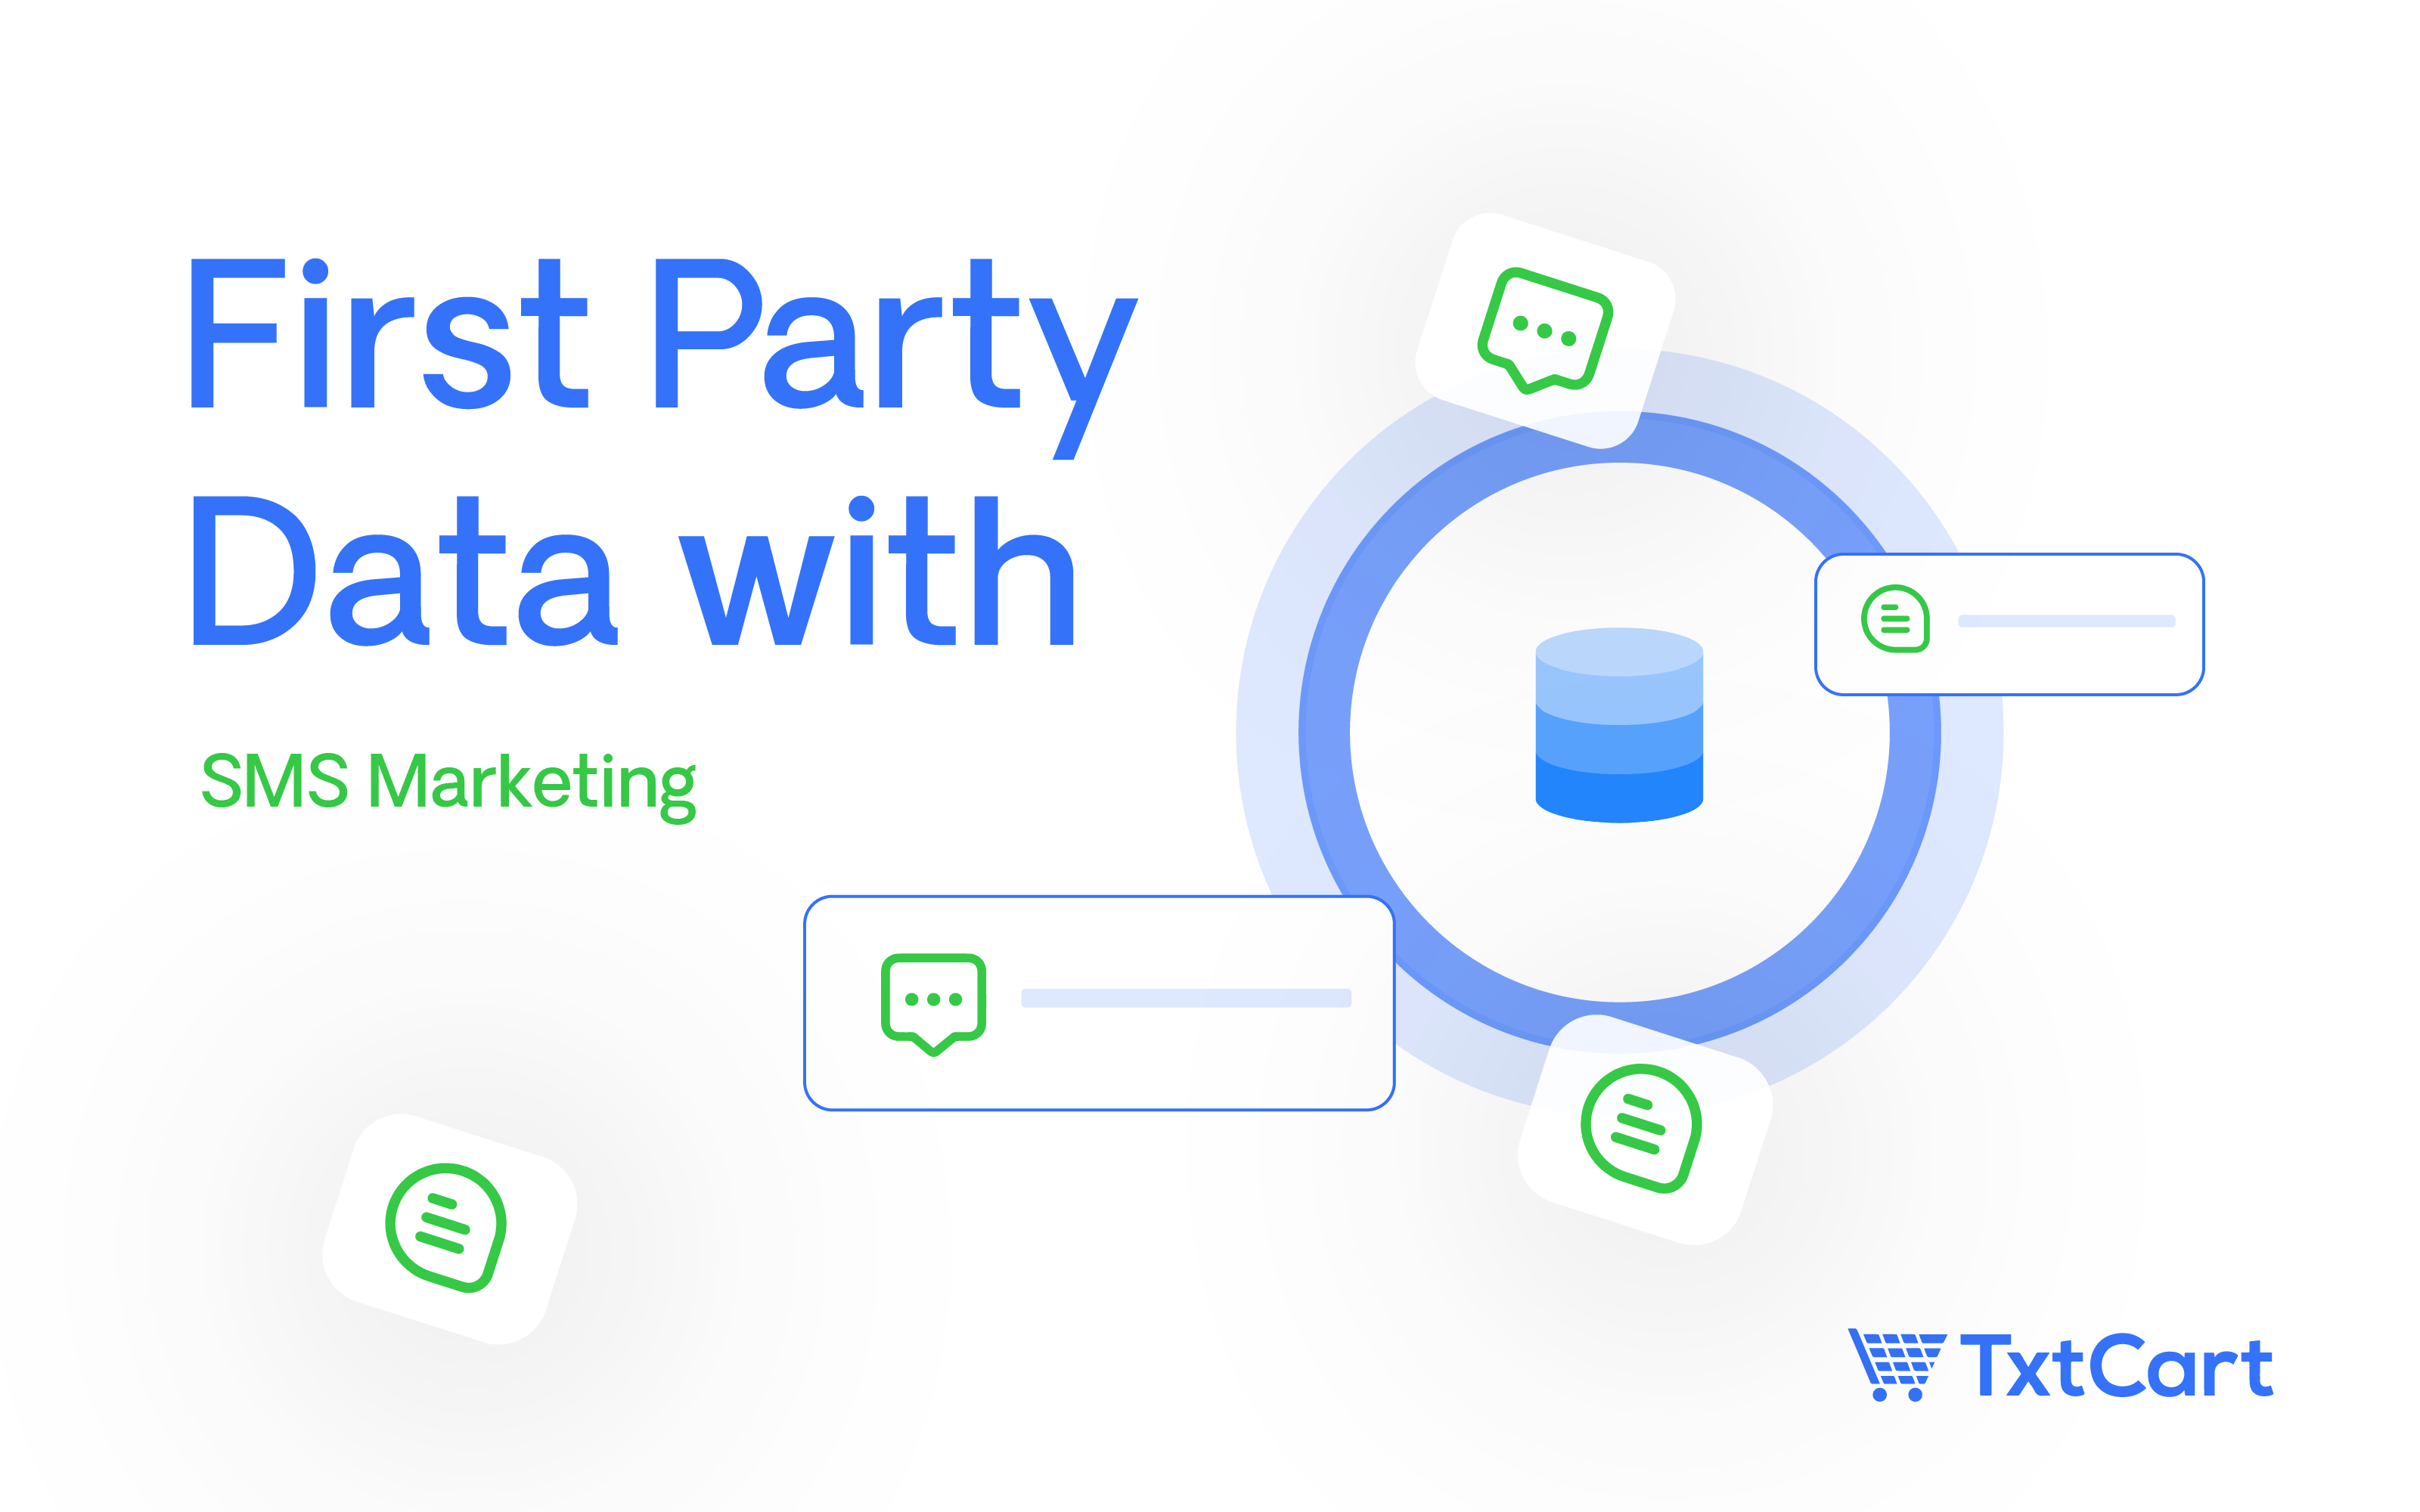 First Party Data with SMS Marketing